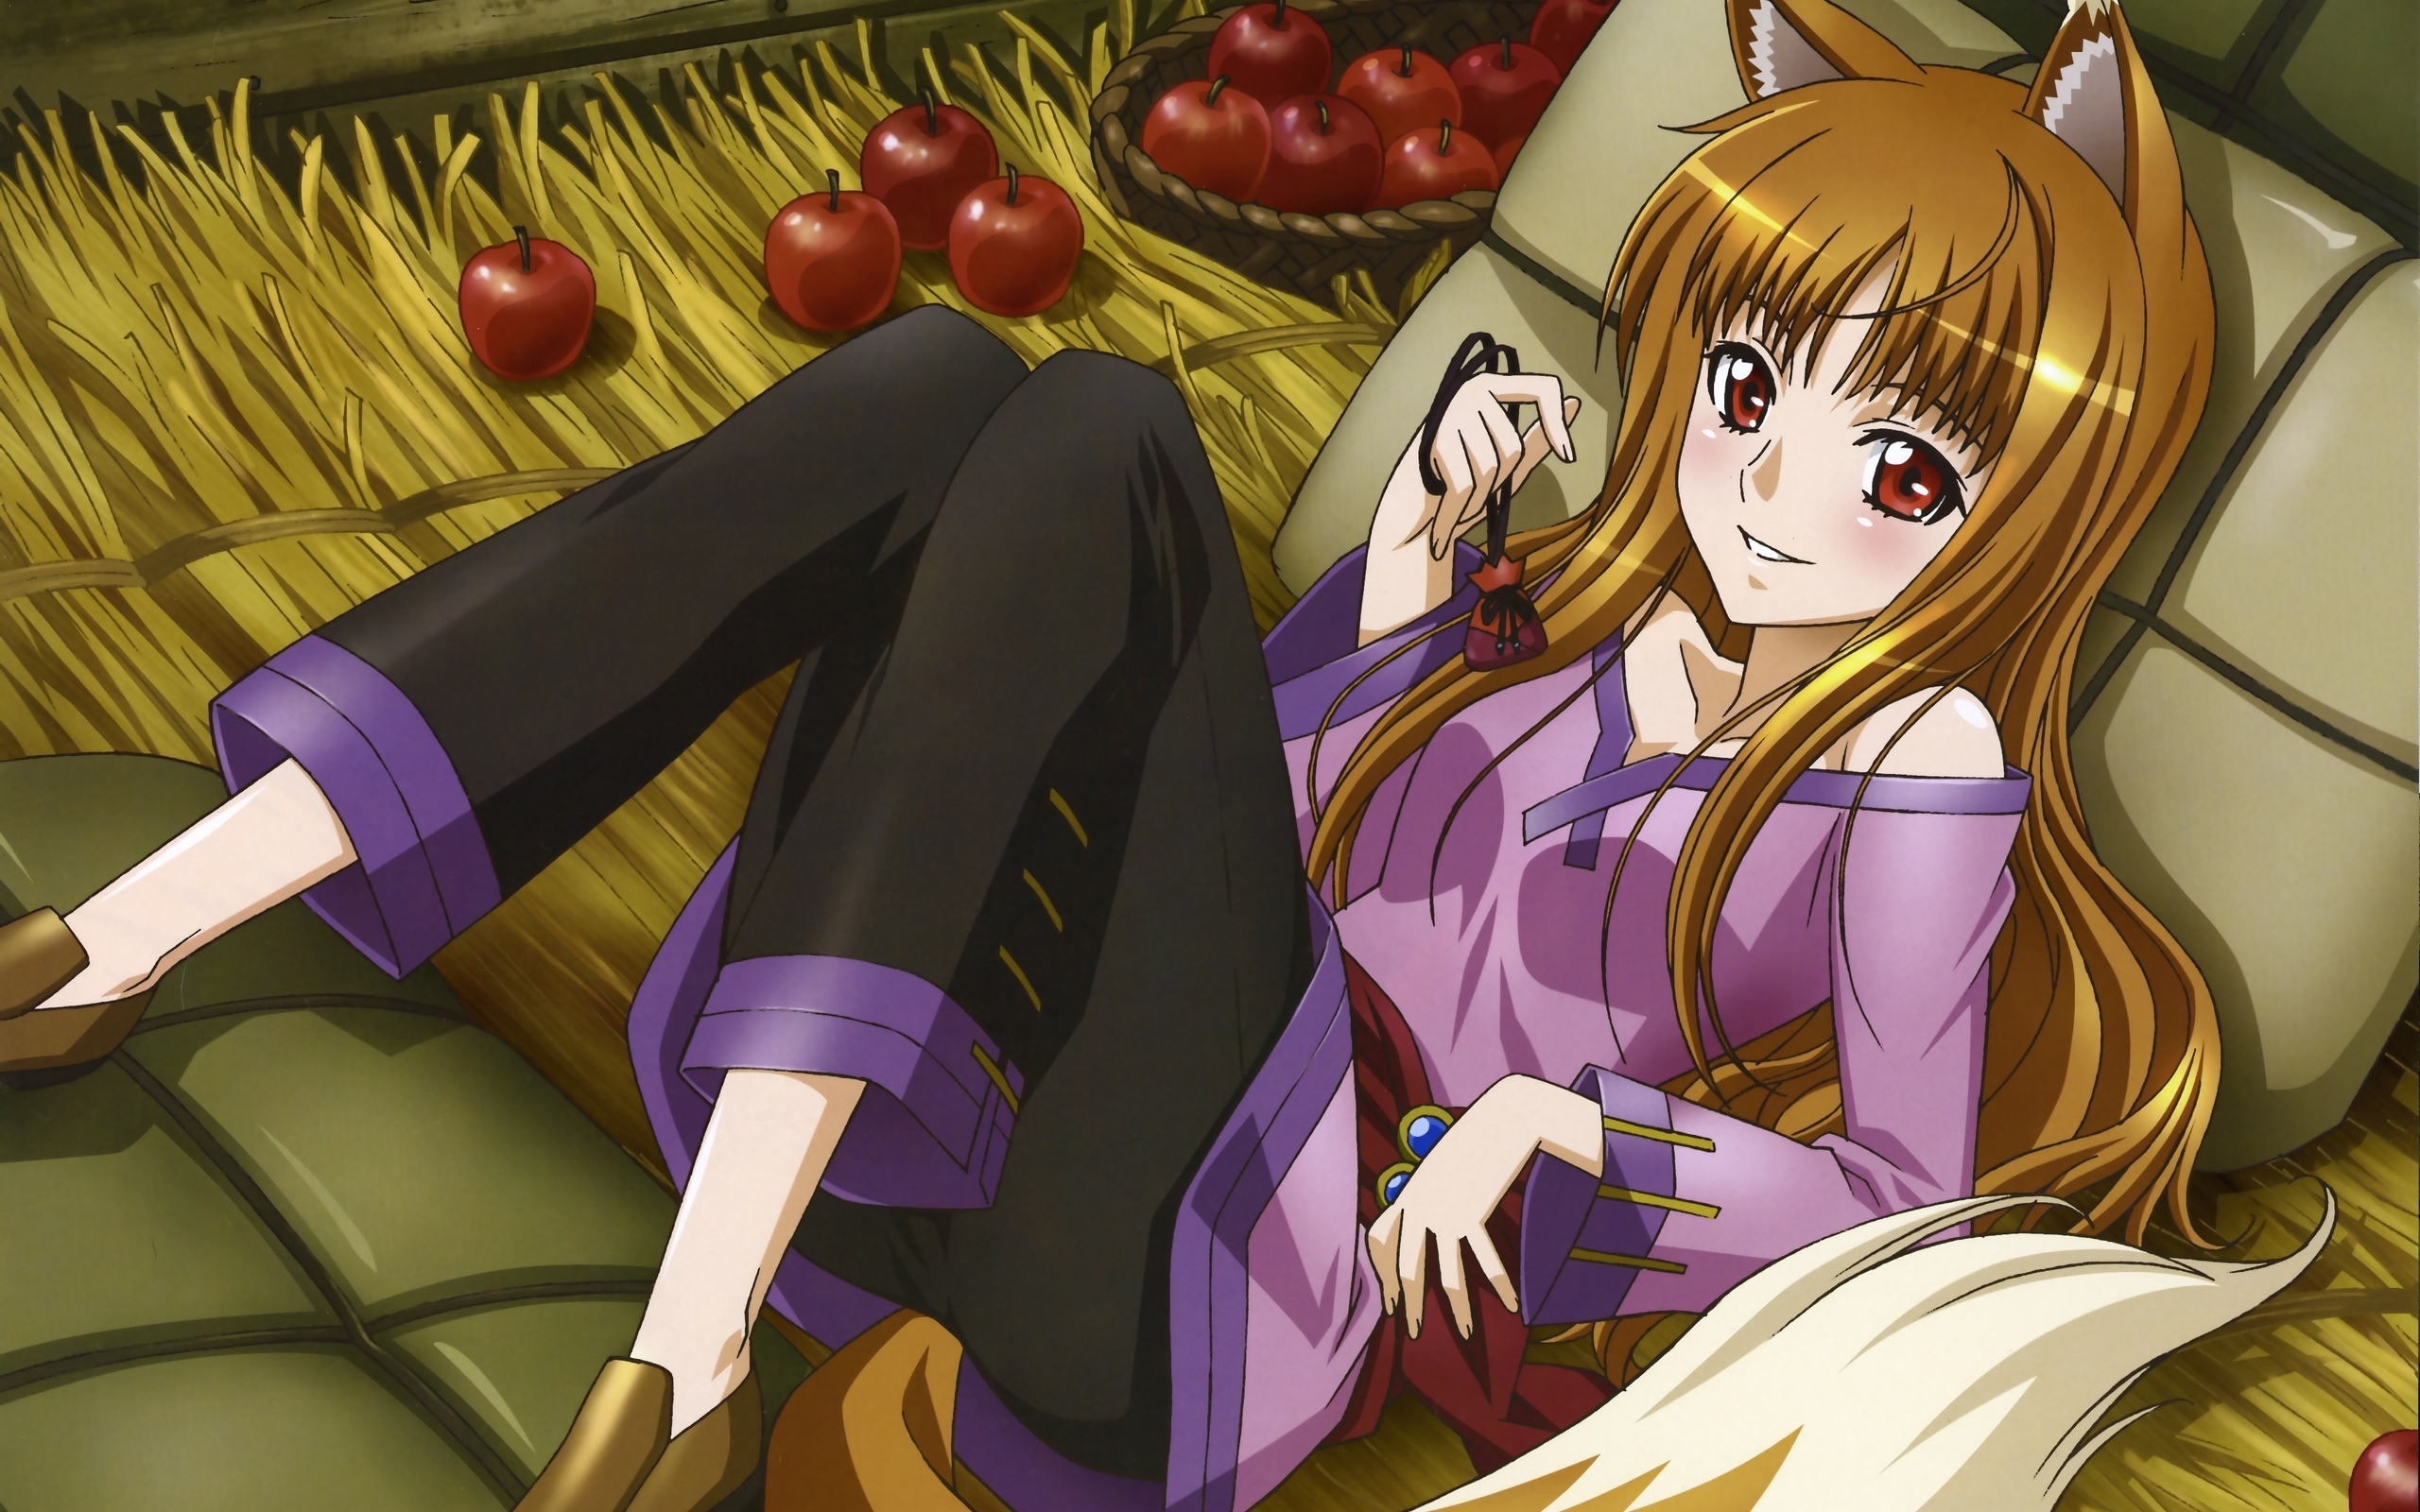 spice and wolf synopsis